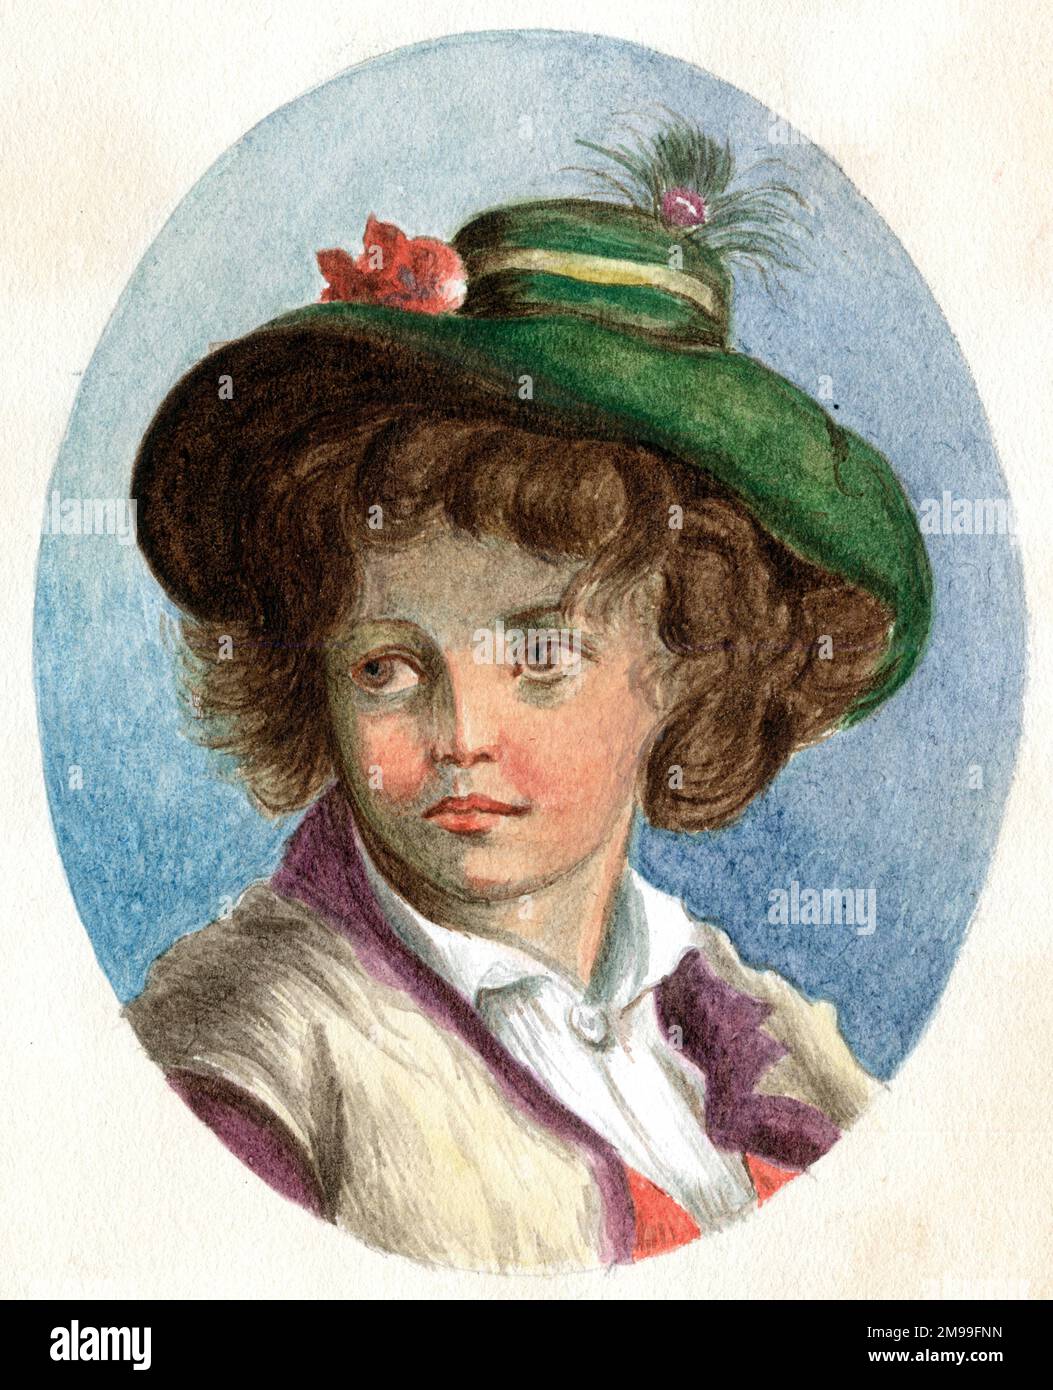 Artwork by Florence Auerbach, boy in a hat. Stock Photo